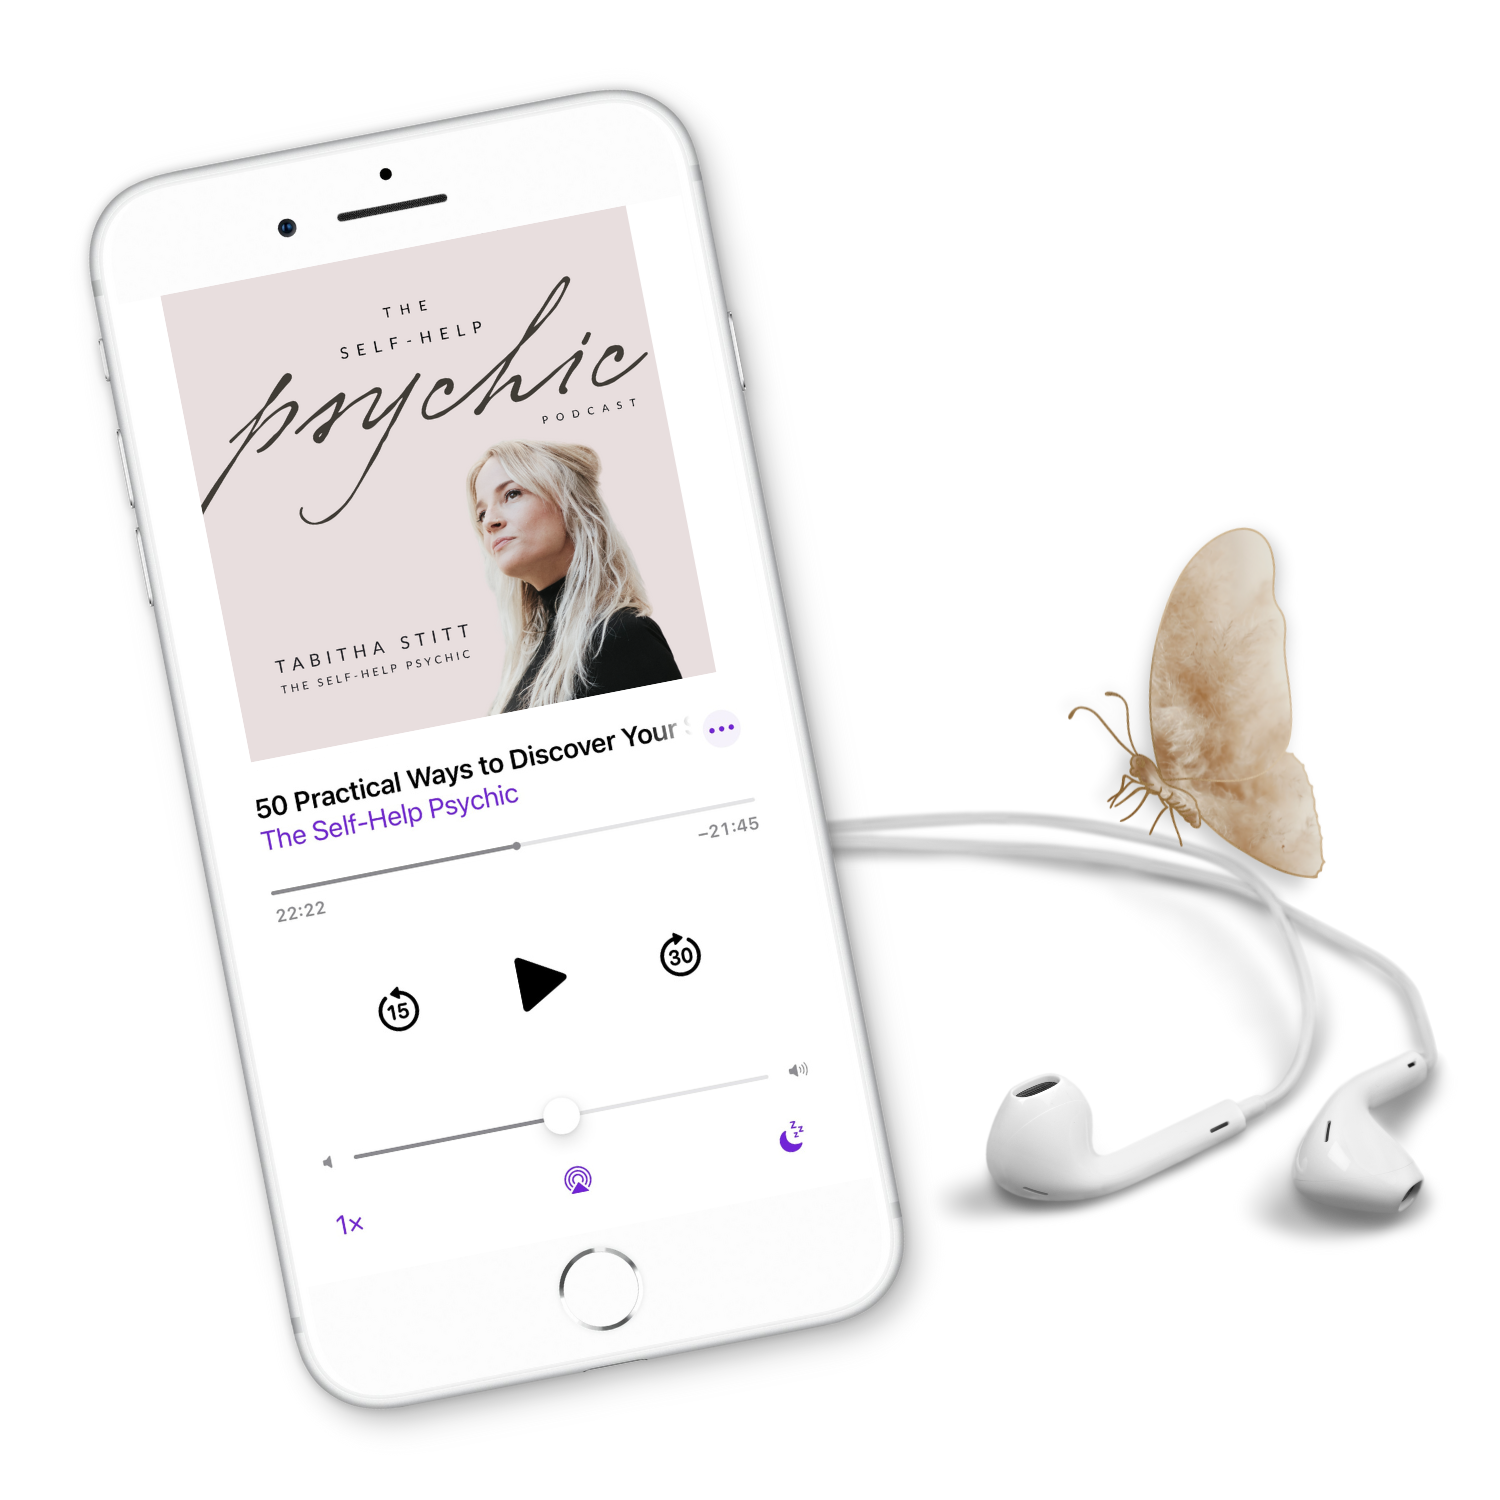 The Self-Help Psychic Podcast with Tabitha Stitt, The Self-Help Psychic, Spiritual Teacher on iPhone with butterfly for transformation and growth